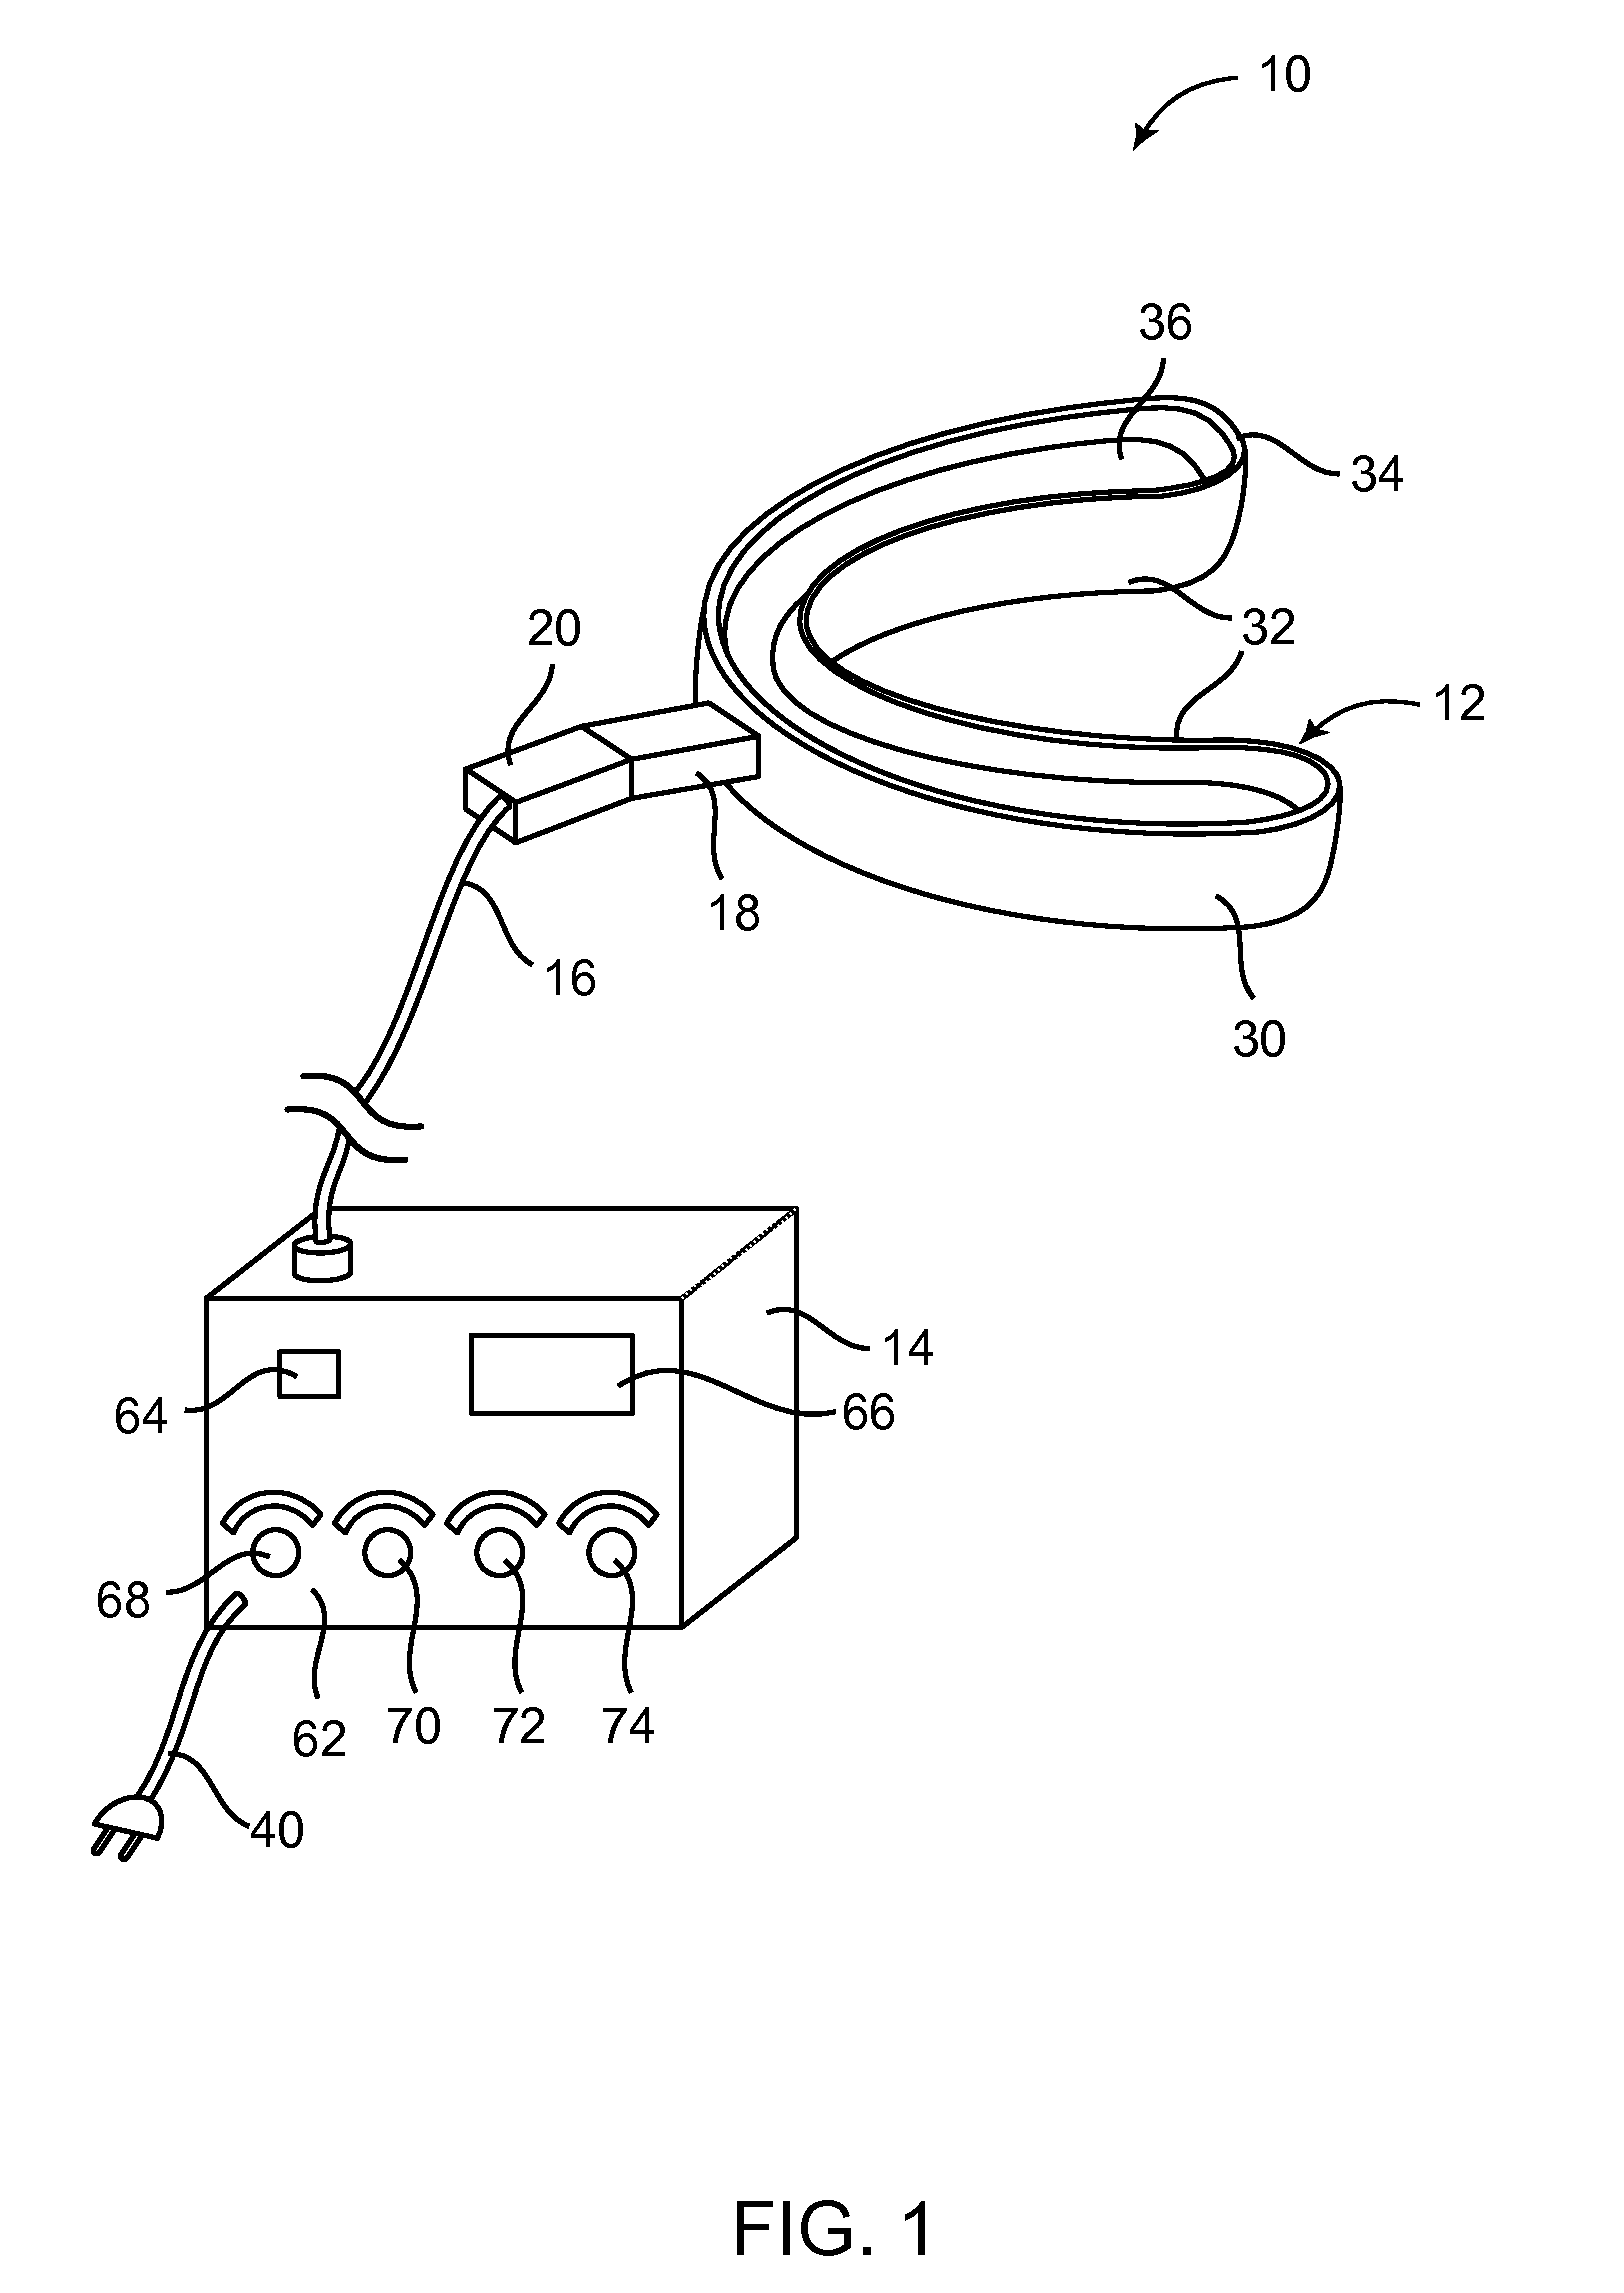 Full arch ultrasonic cleaner apparatus and method of use